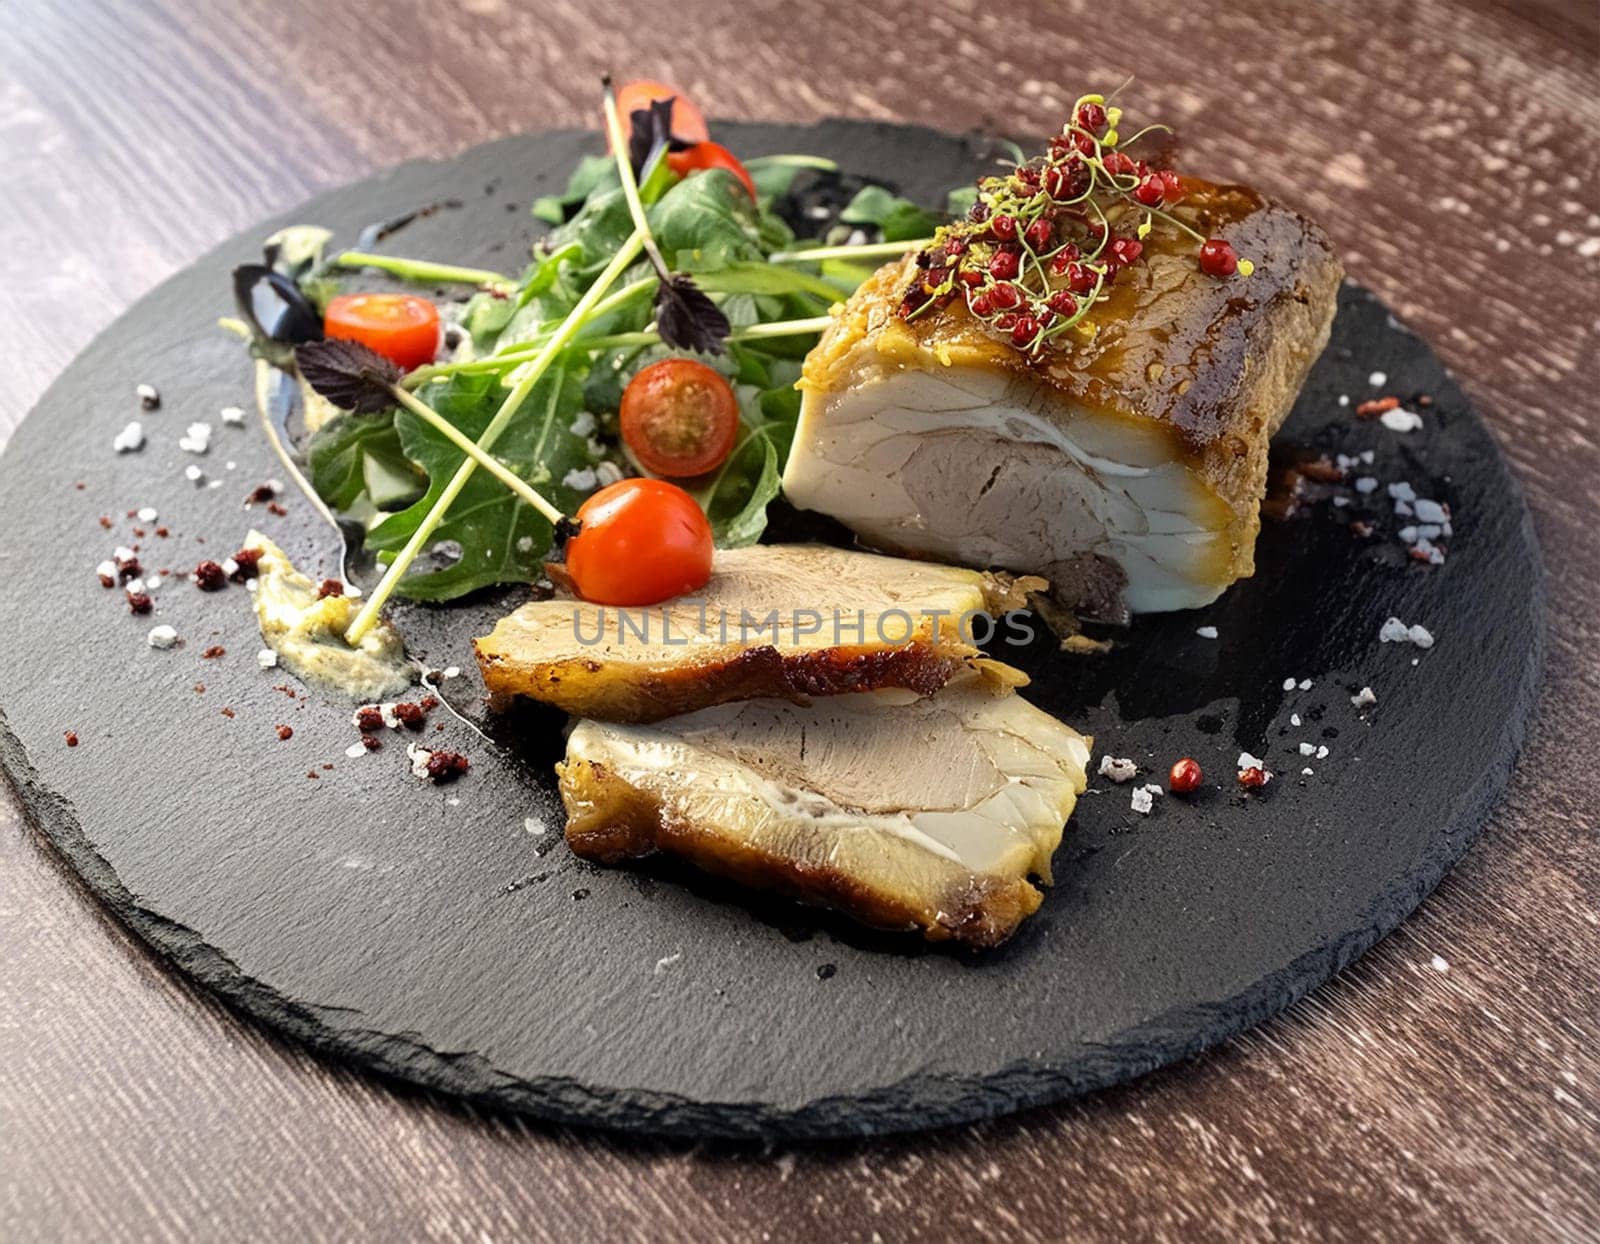 Top view of roasted pork belly with crust on a baking sheet by JFsPic